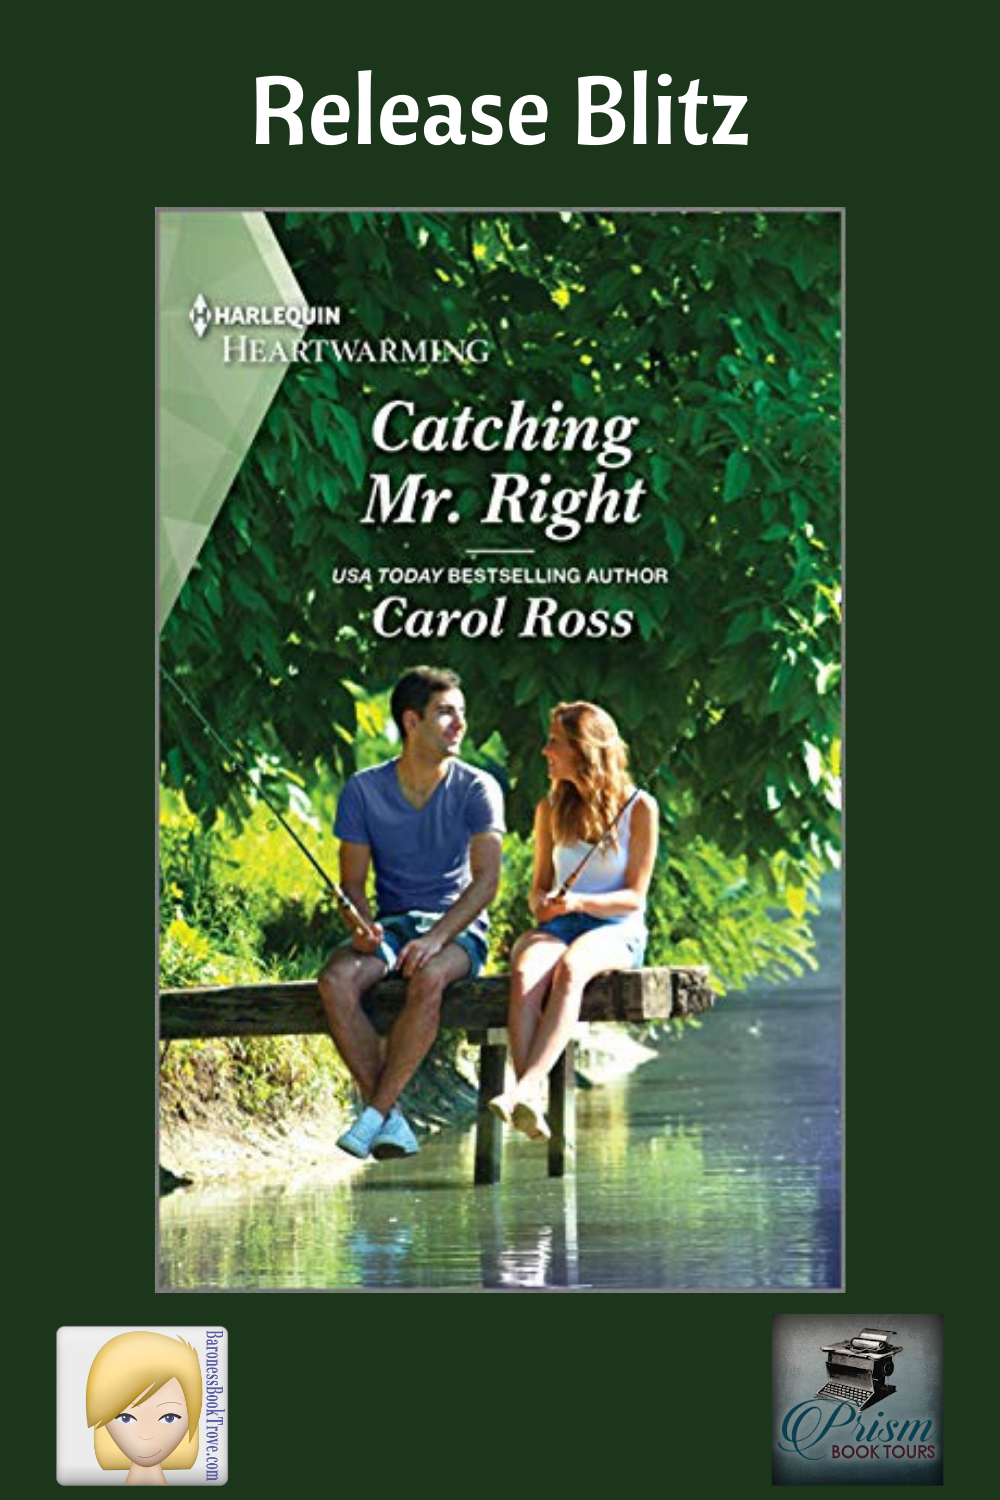 Catching Mr. Right Release Blitz